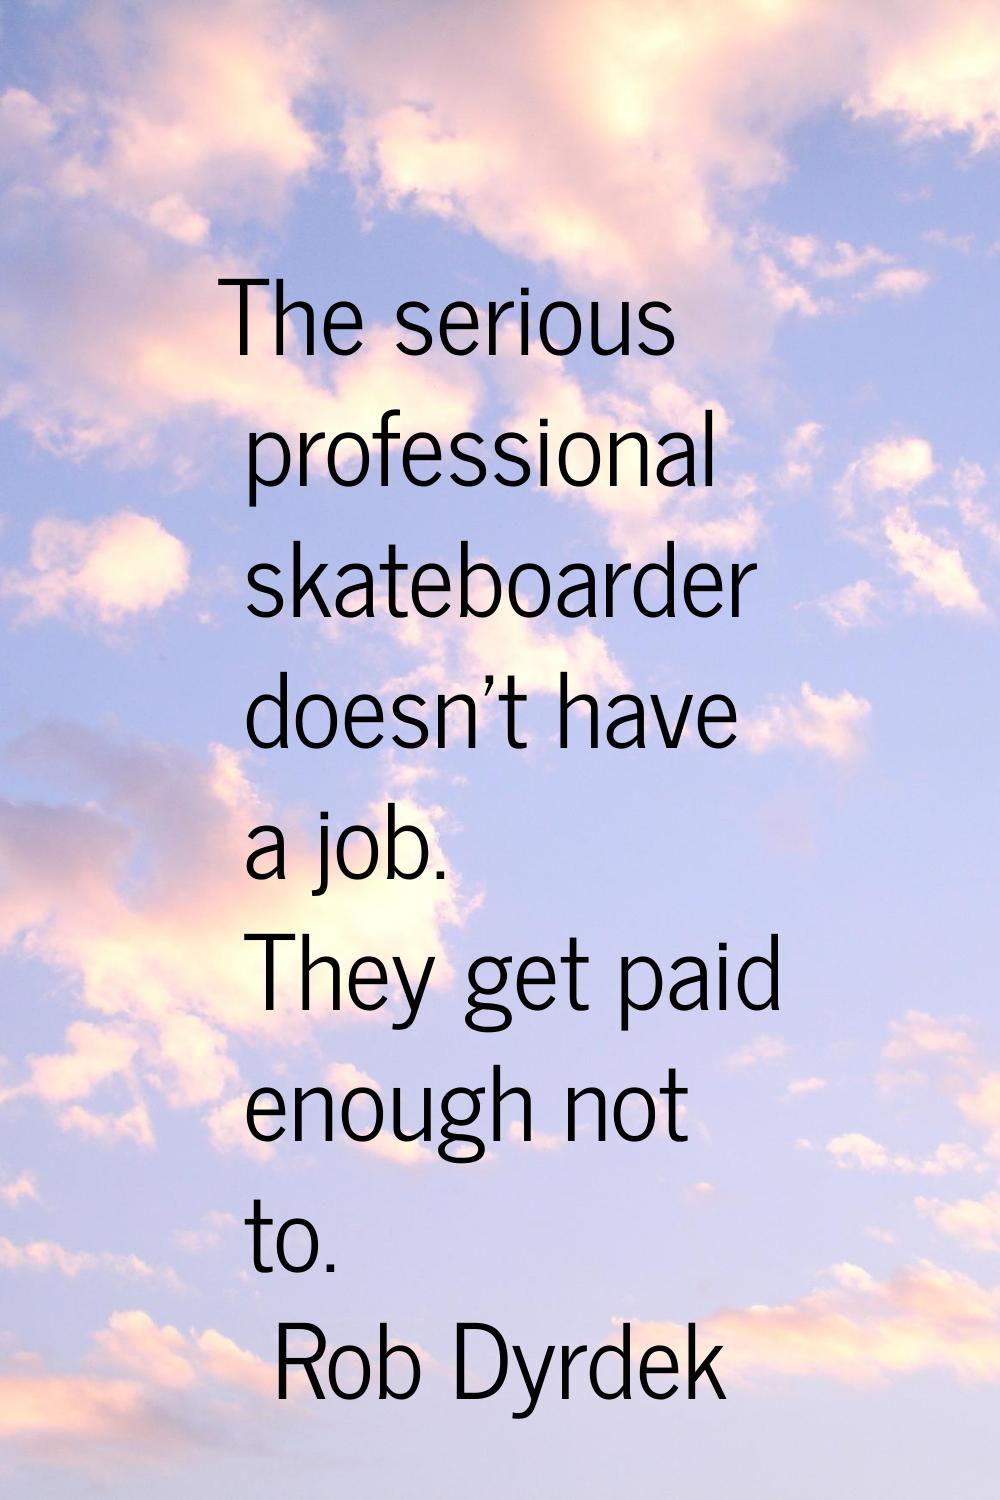 The serious professional skateboarder doesn't have a job. They get paid enough not to.